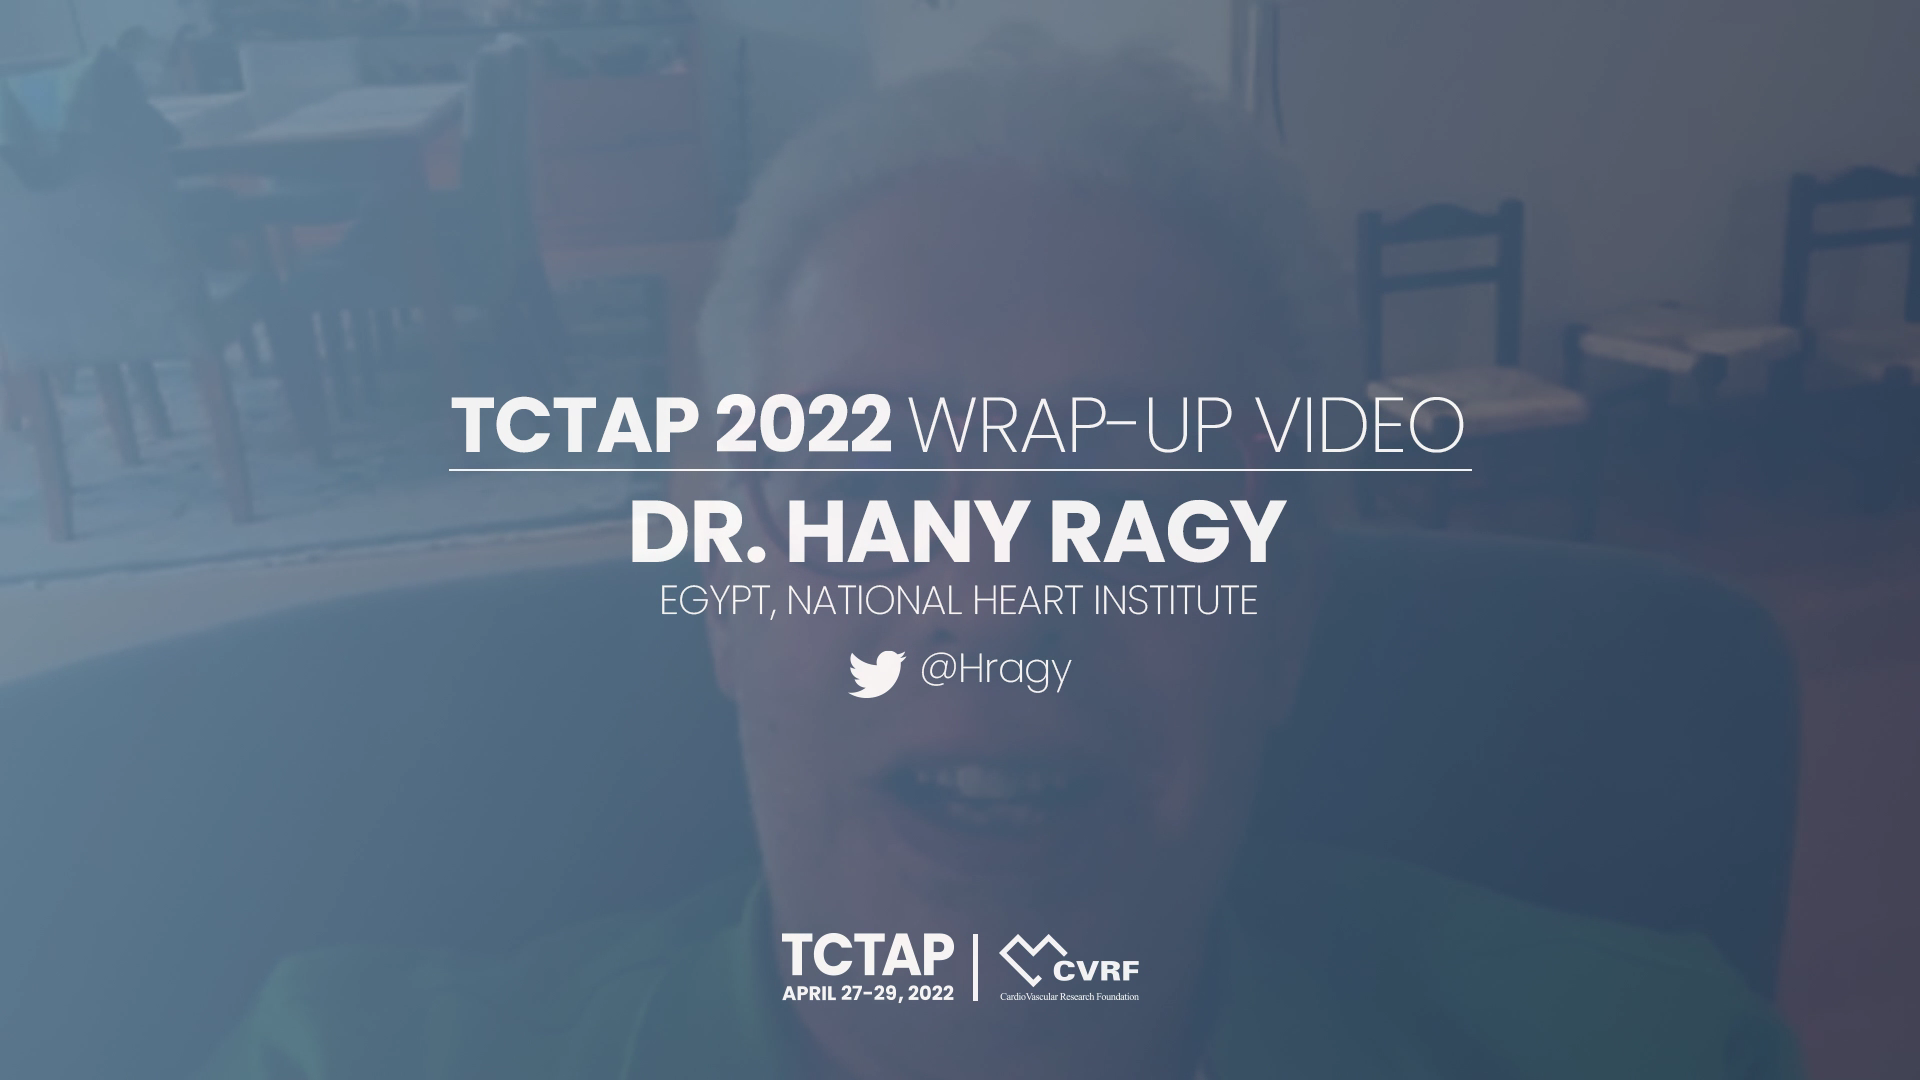 TCTAP 2022 Wrap-up Video from Dr. Hany Ragy